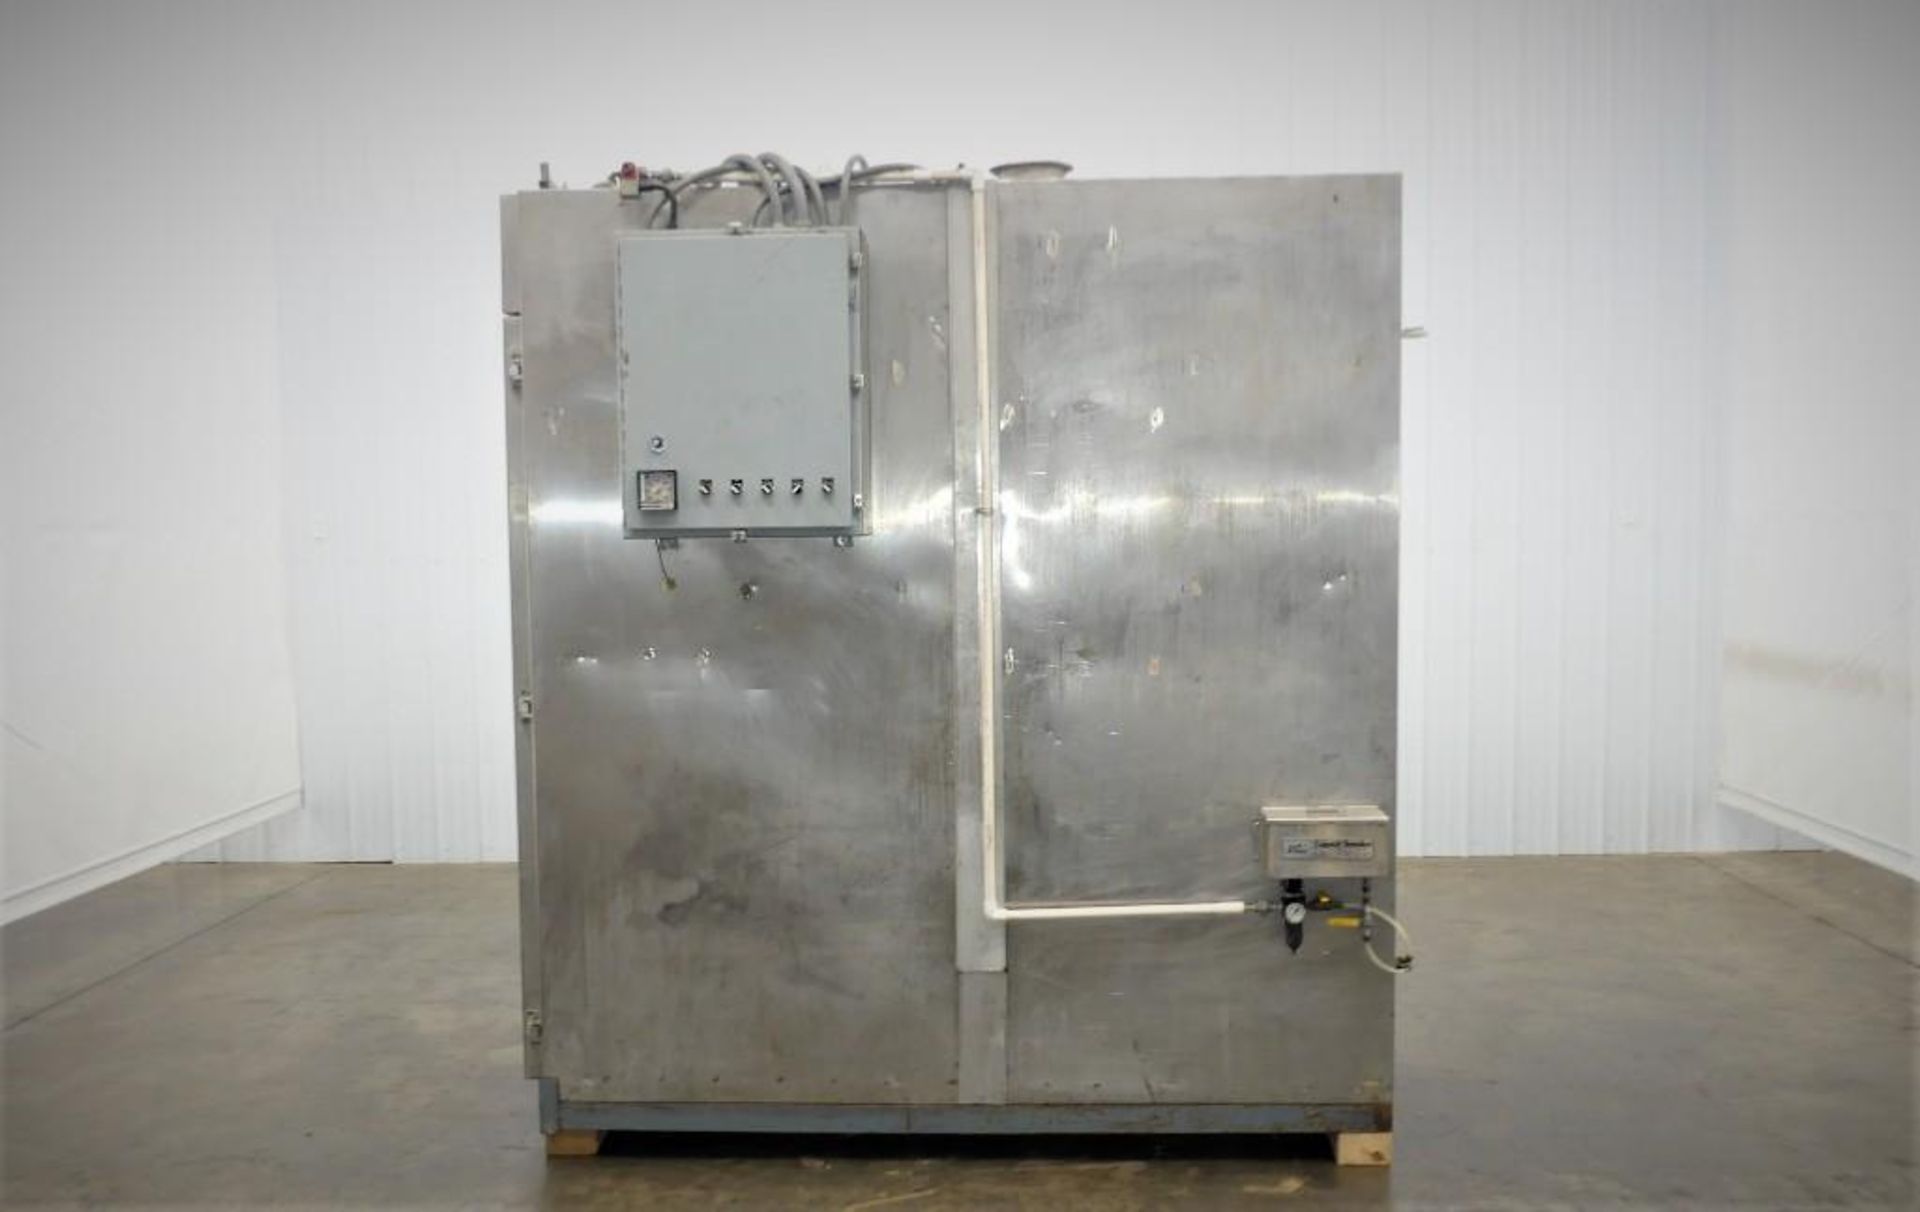 Maurer & Sohne Two Truck Stainless Smokehouse - Image 3 of 8